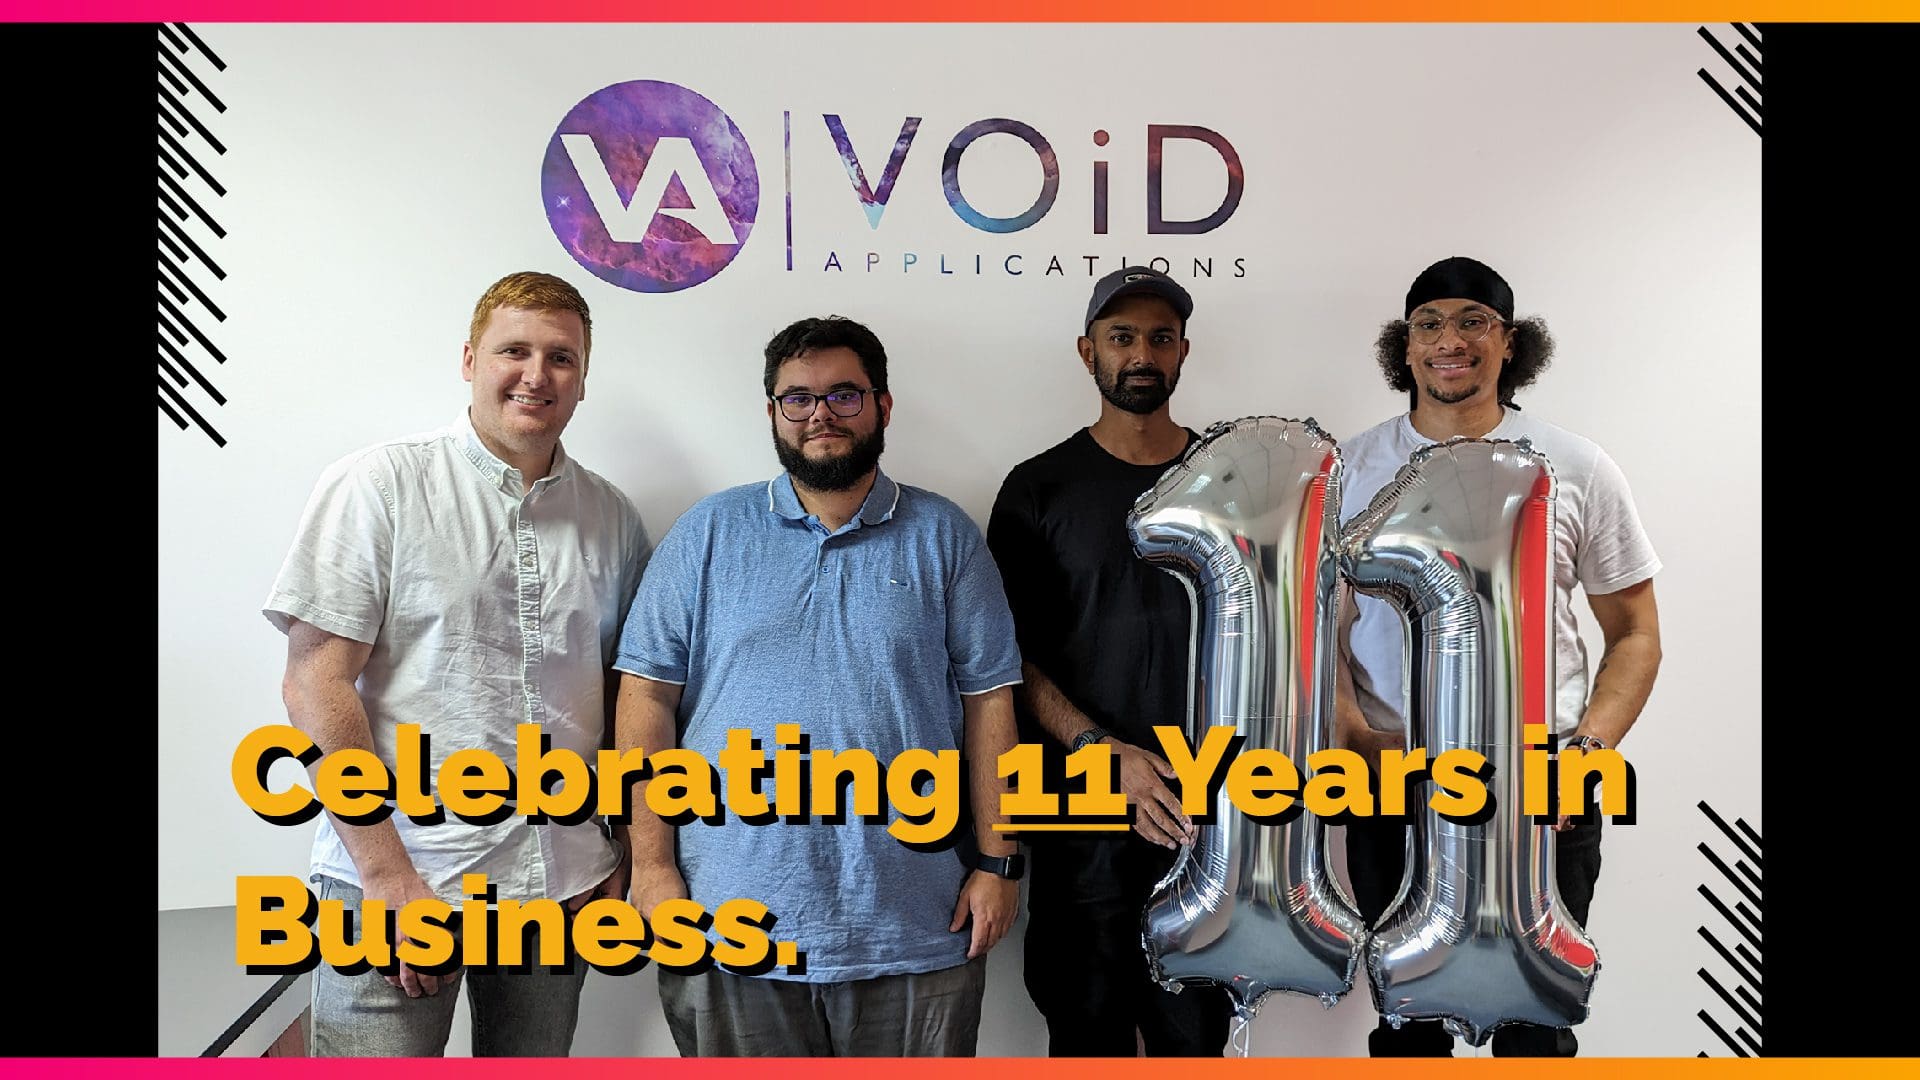 VOiD Applications Celebrates 11 Years in Business